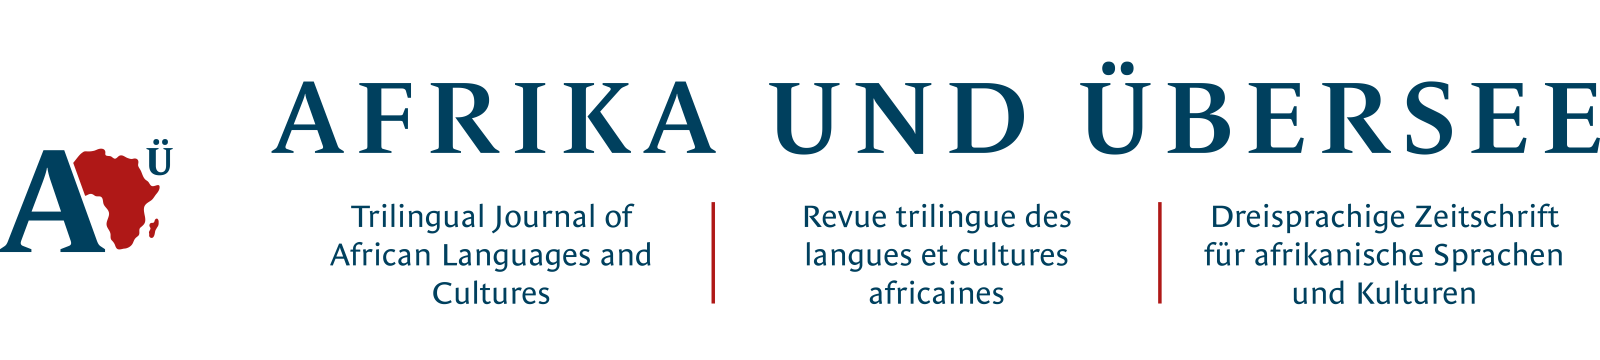 On the left side, the logo of Afrika und Übersee ist presented. To its right, the title of the journal, Afrika und Übersee is shown in capital letters. Below, the trilingual subtitle ( Trilingual Journal of African Languages and Cultures / Revue trilingue des langues et cultures africaines / Dreisprachige Zeitschrift für afrikanische Sprachen und Kulturen) of the journal is located. 